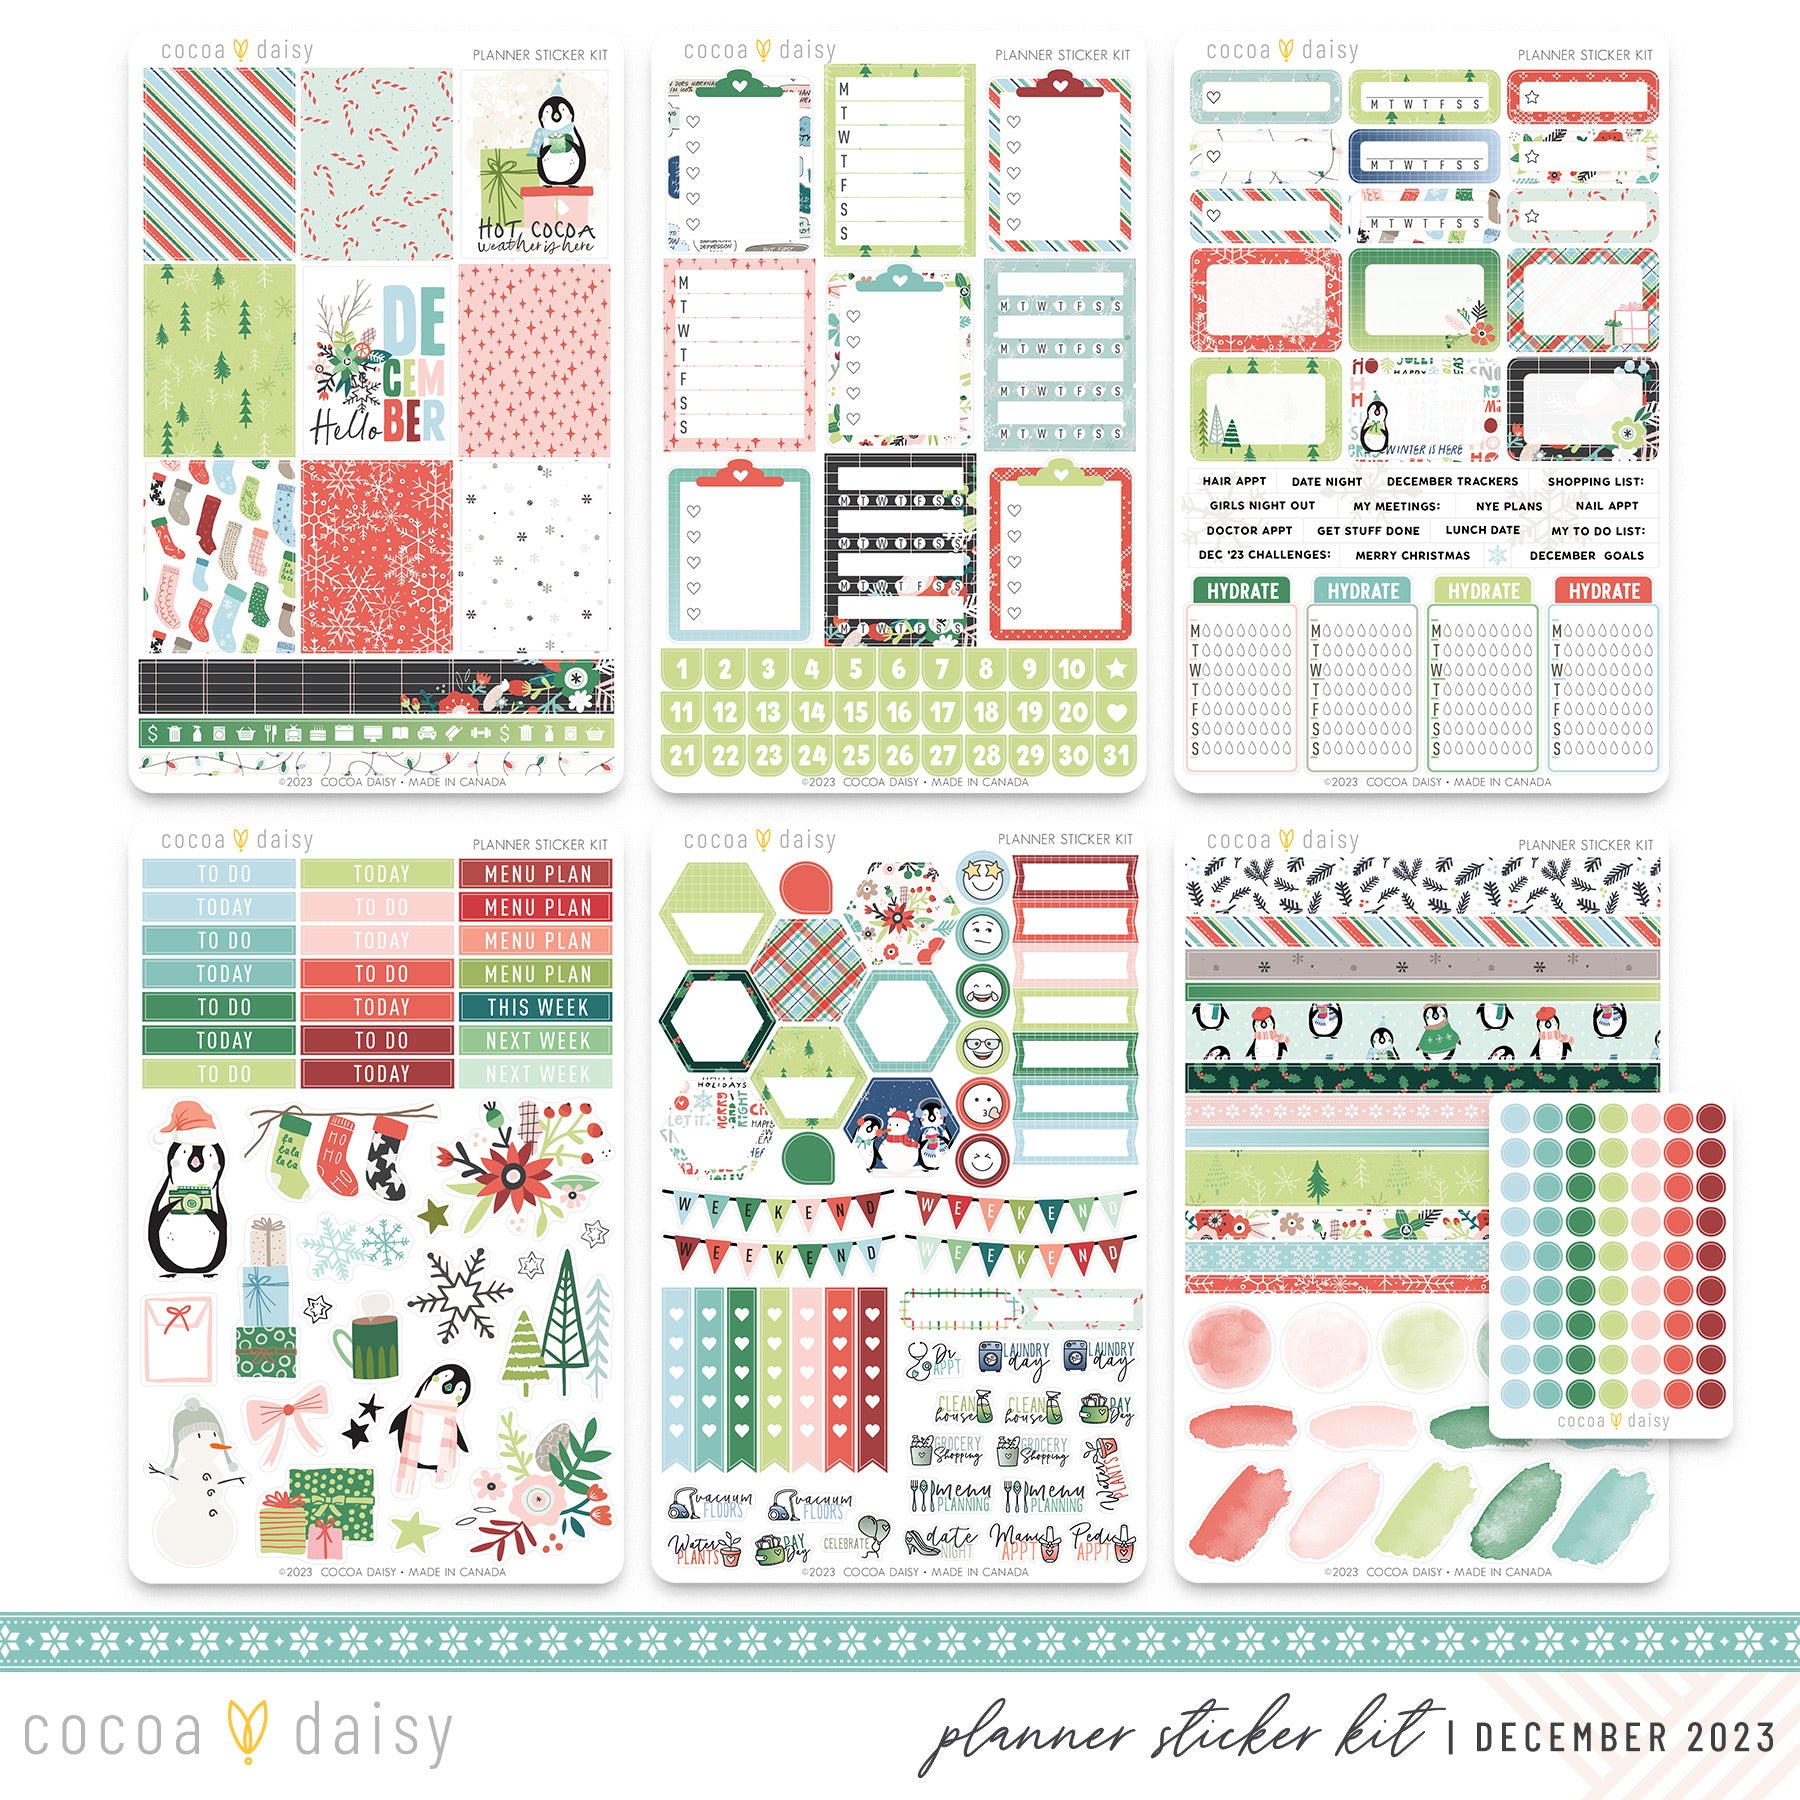 Bible Journaling Sticker Kit - 1 month. – Cocoa Daisy